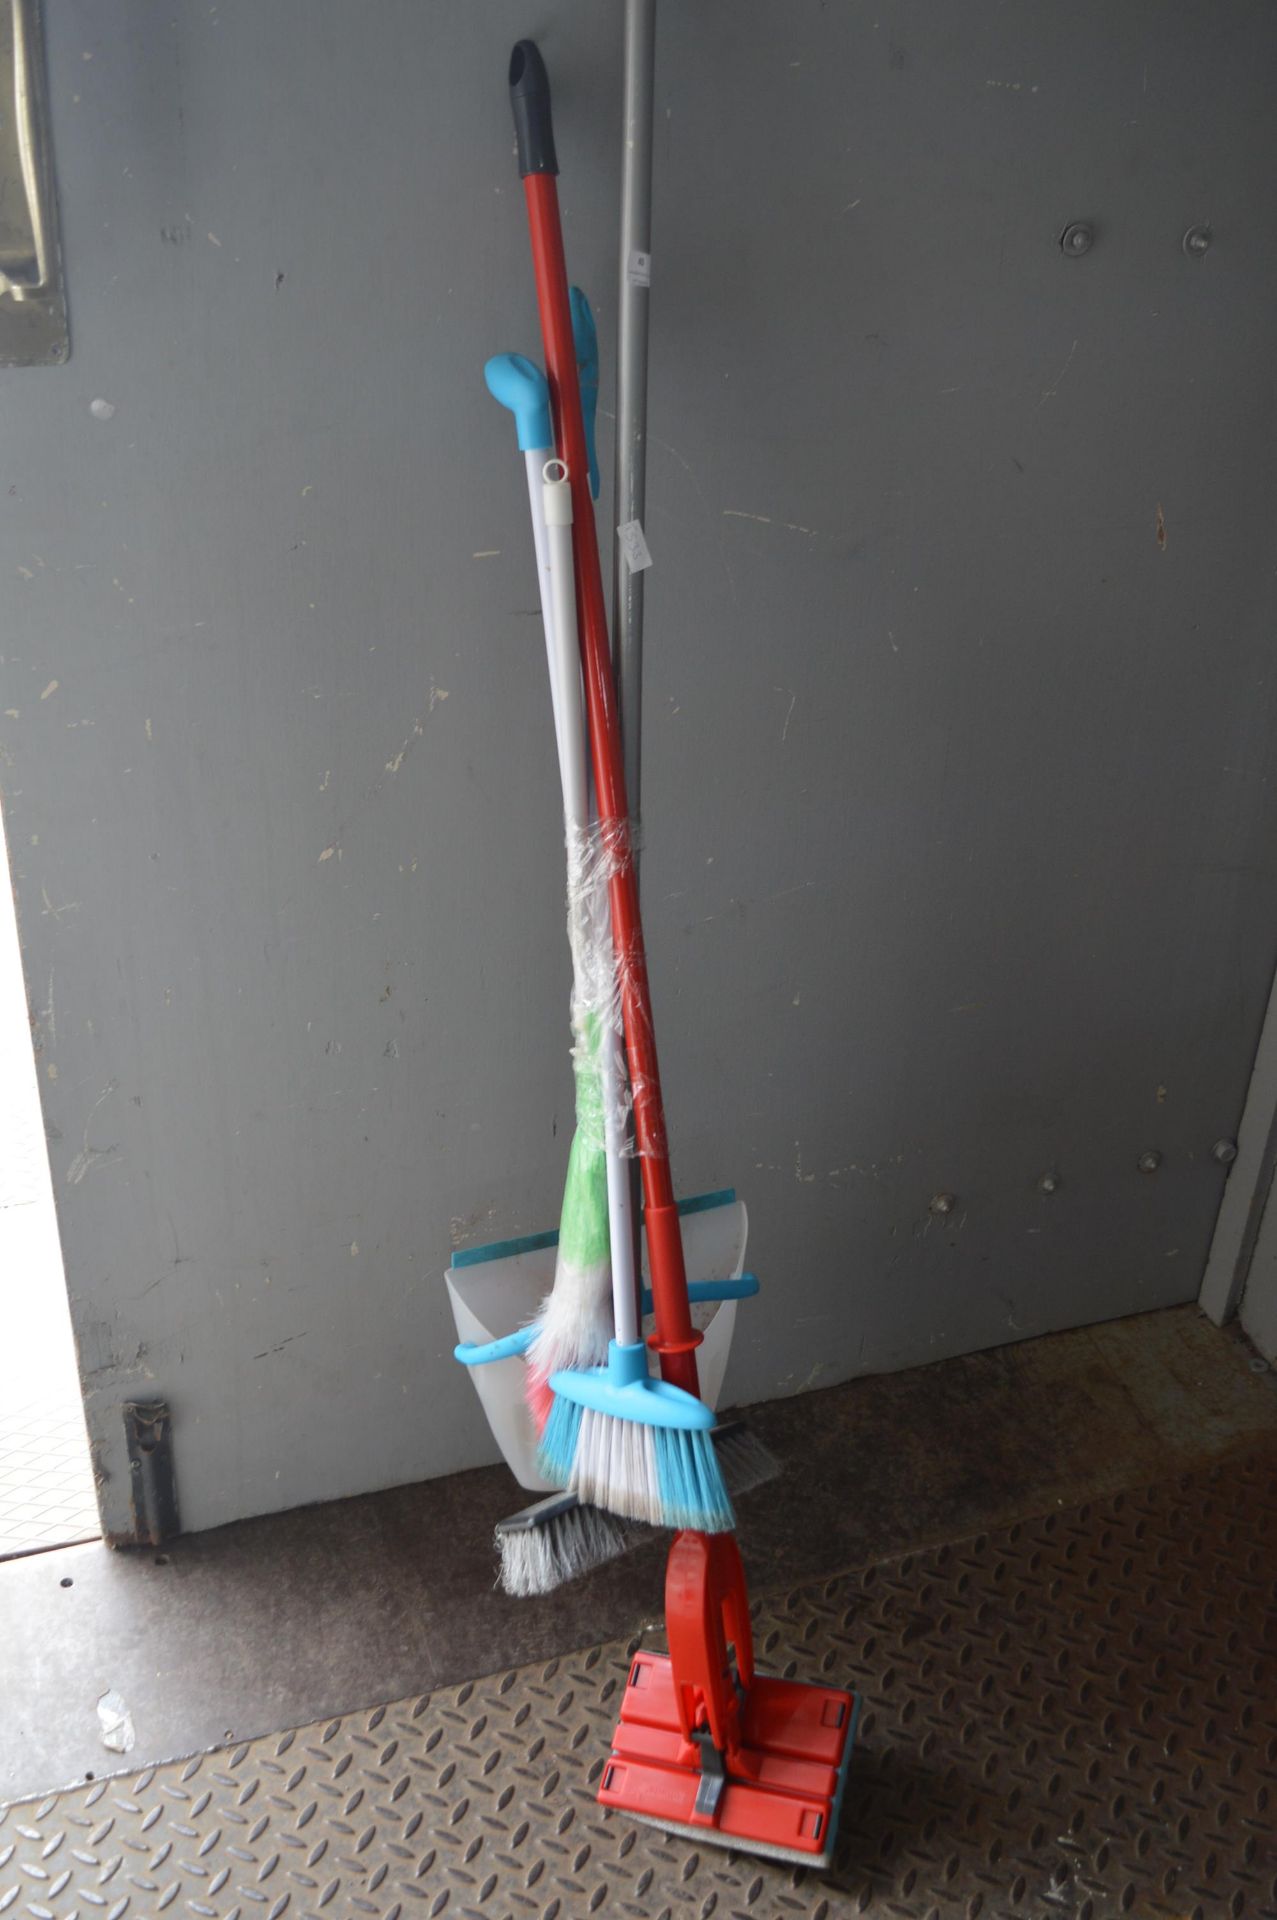 Bundle of Brushes and a Floor Cleaner